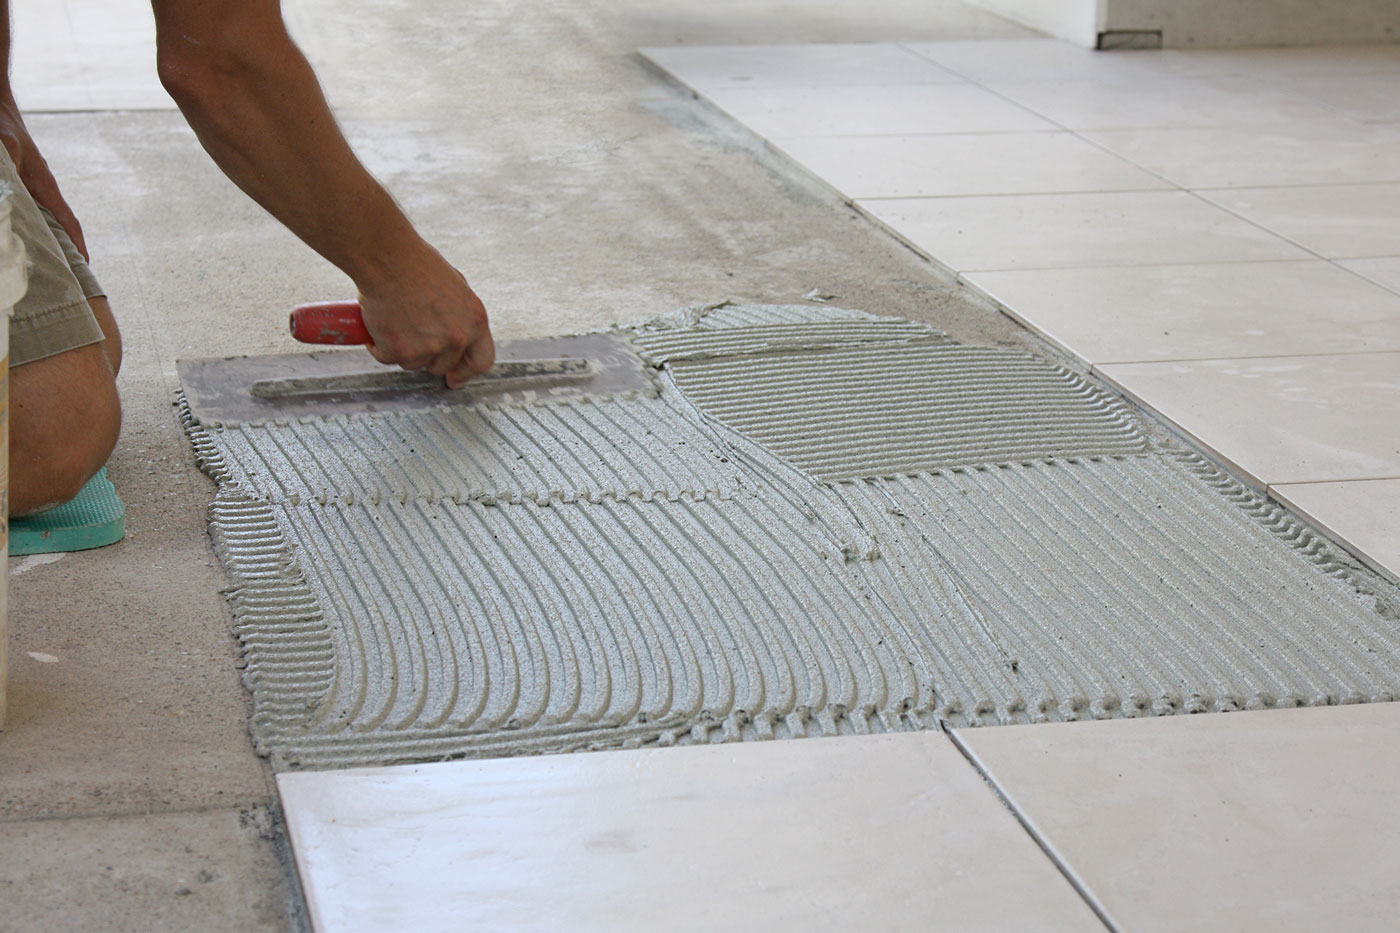 A tiled floor being fitted